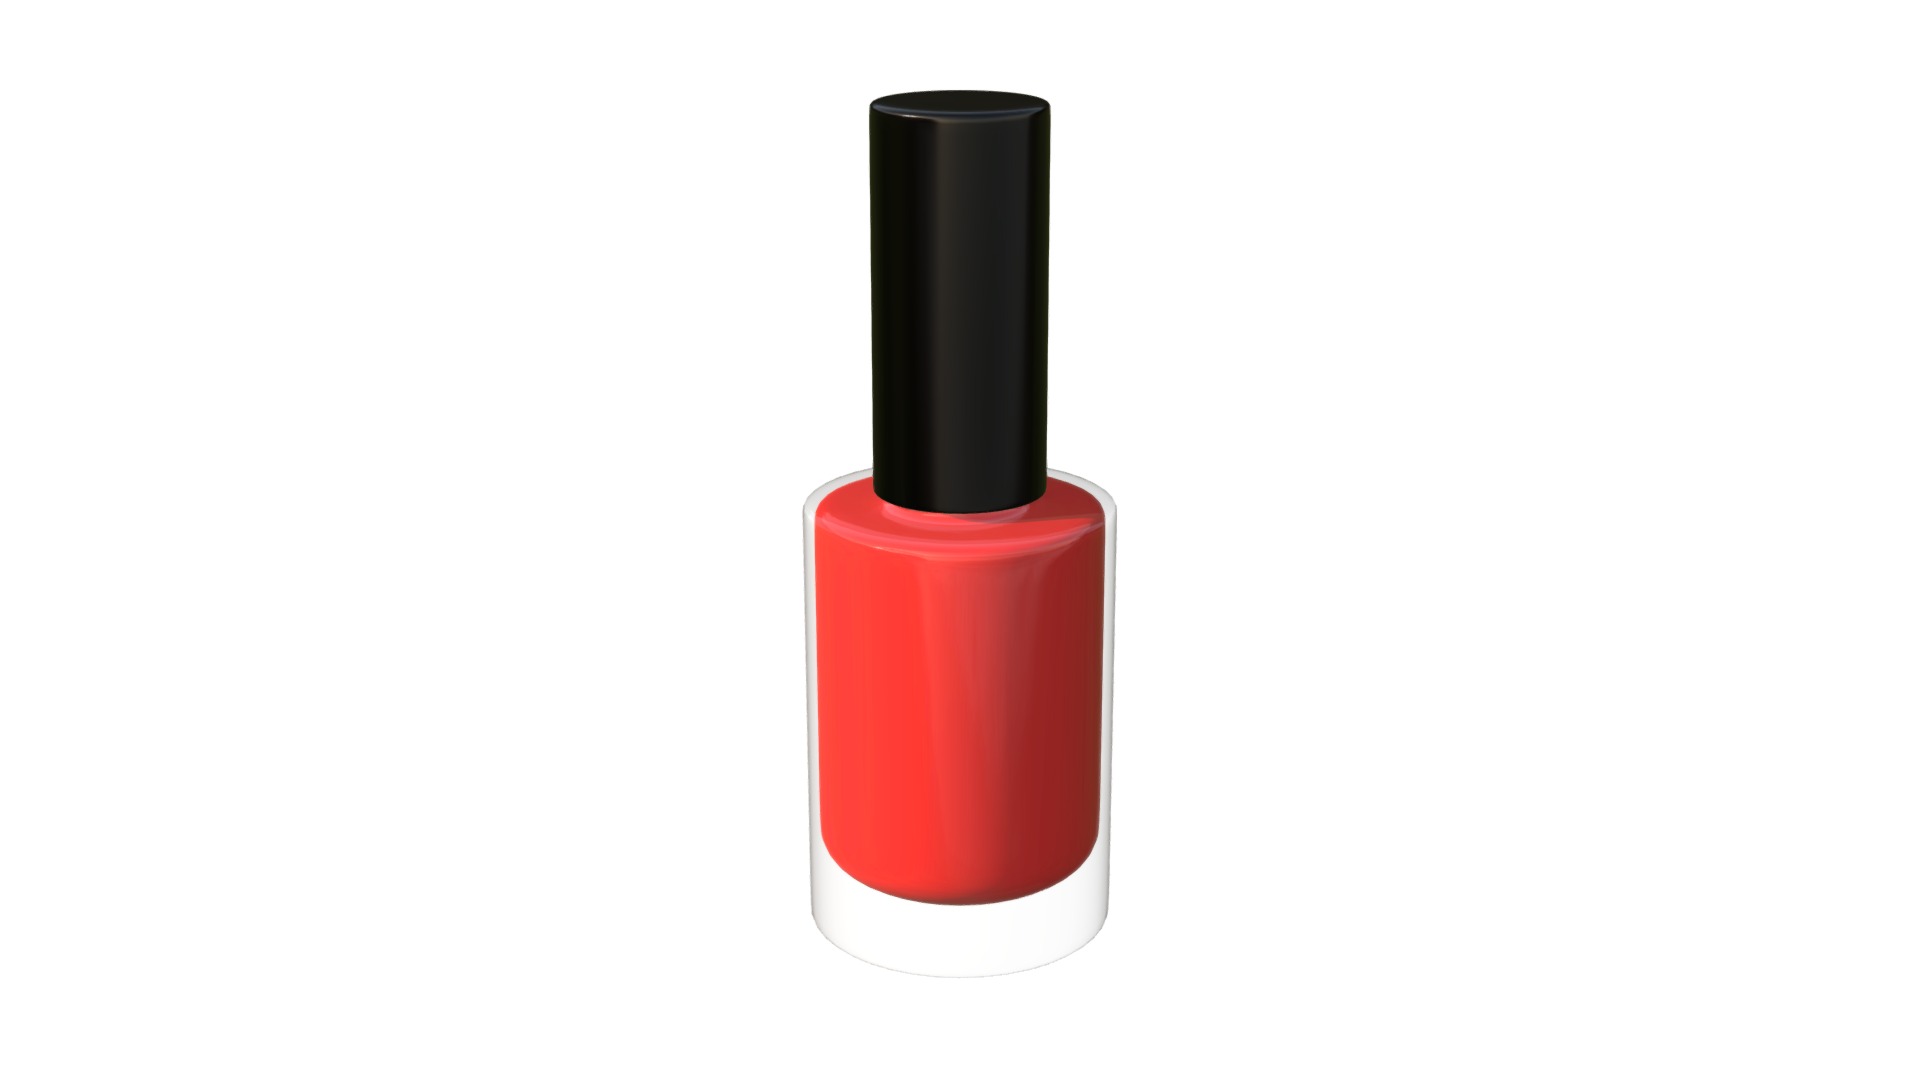 3D model Nail polish red - This is a 3D model of the Nail polish red. The 3D model is about a red and black tube.